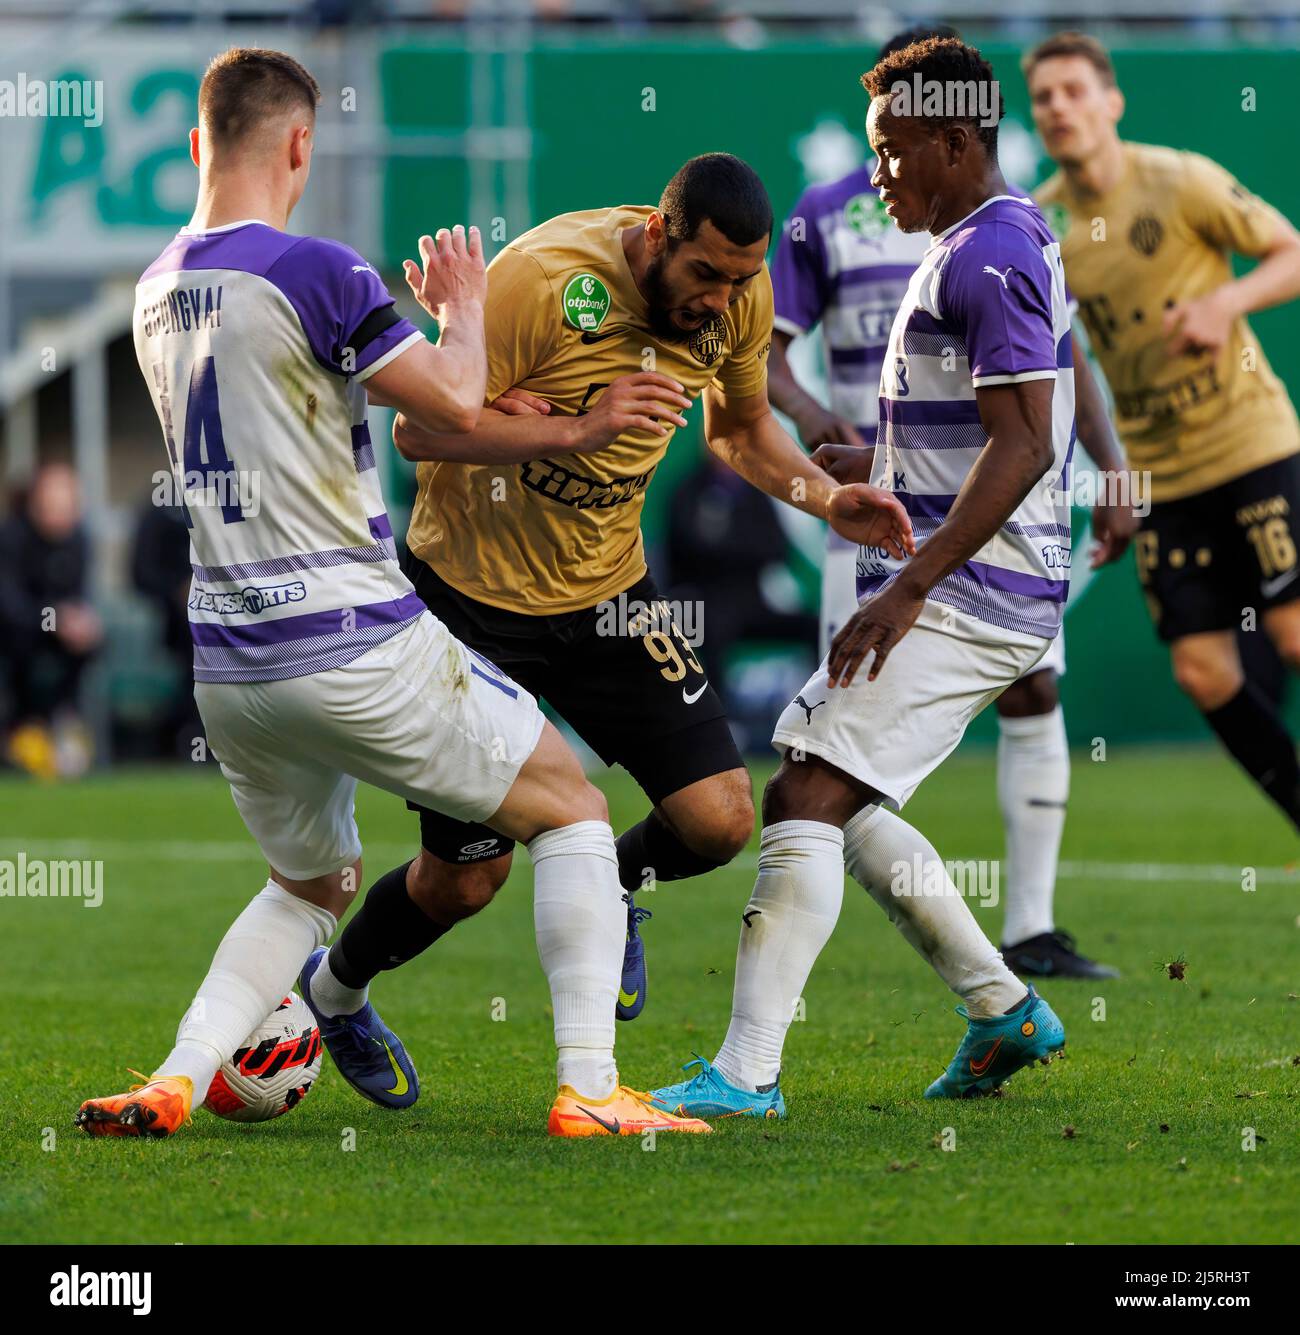 BUDAPEST, HUNGARY - APRIL 24: Aissa Laidouni of Ferencvarosi TC fights for the ball with Aron Csongvai of Ujpest FC (l) and Vincent Onovo of Ujpest FC during the Hungarian OTP Bank Liga match between Ferencvarosi TC and Ujpest FC at Groupama Arena on April 24, 2022 in Budapest, Hungary. Stock Photo